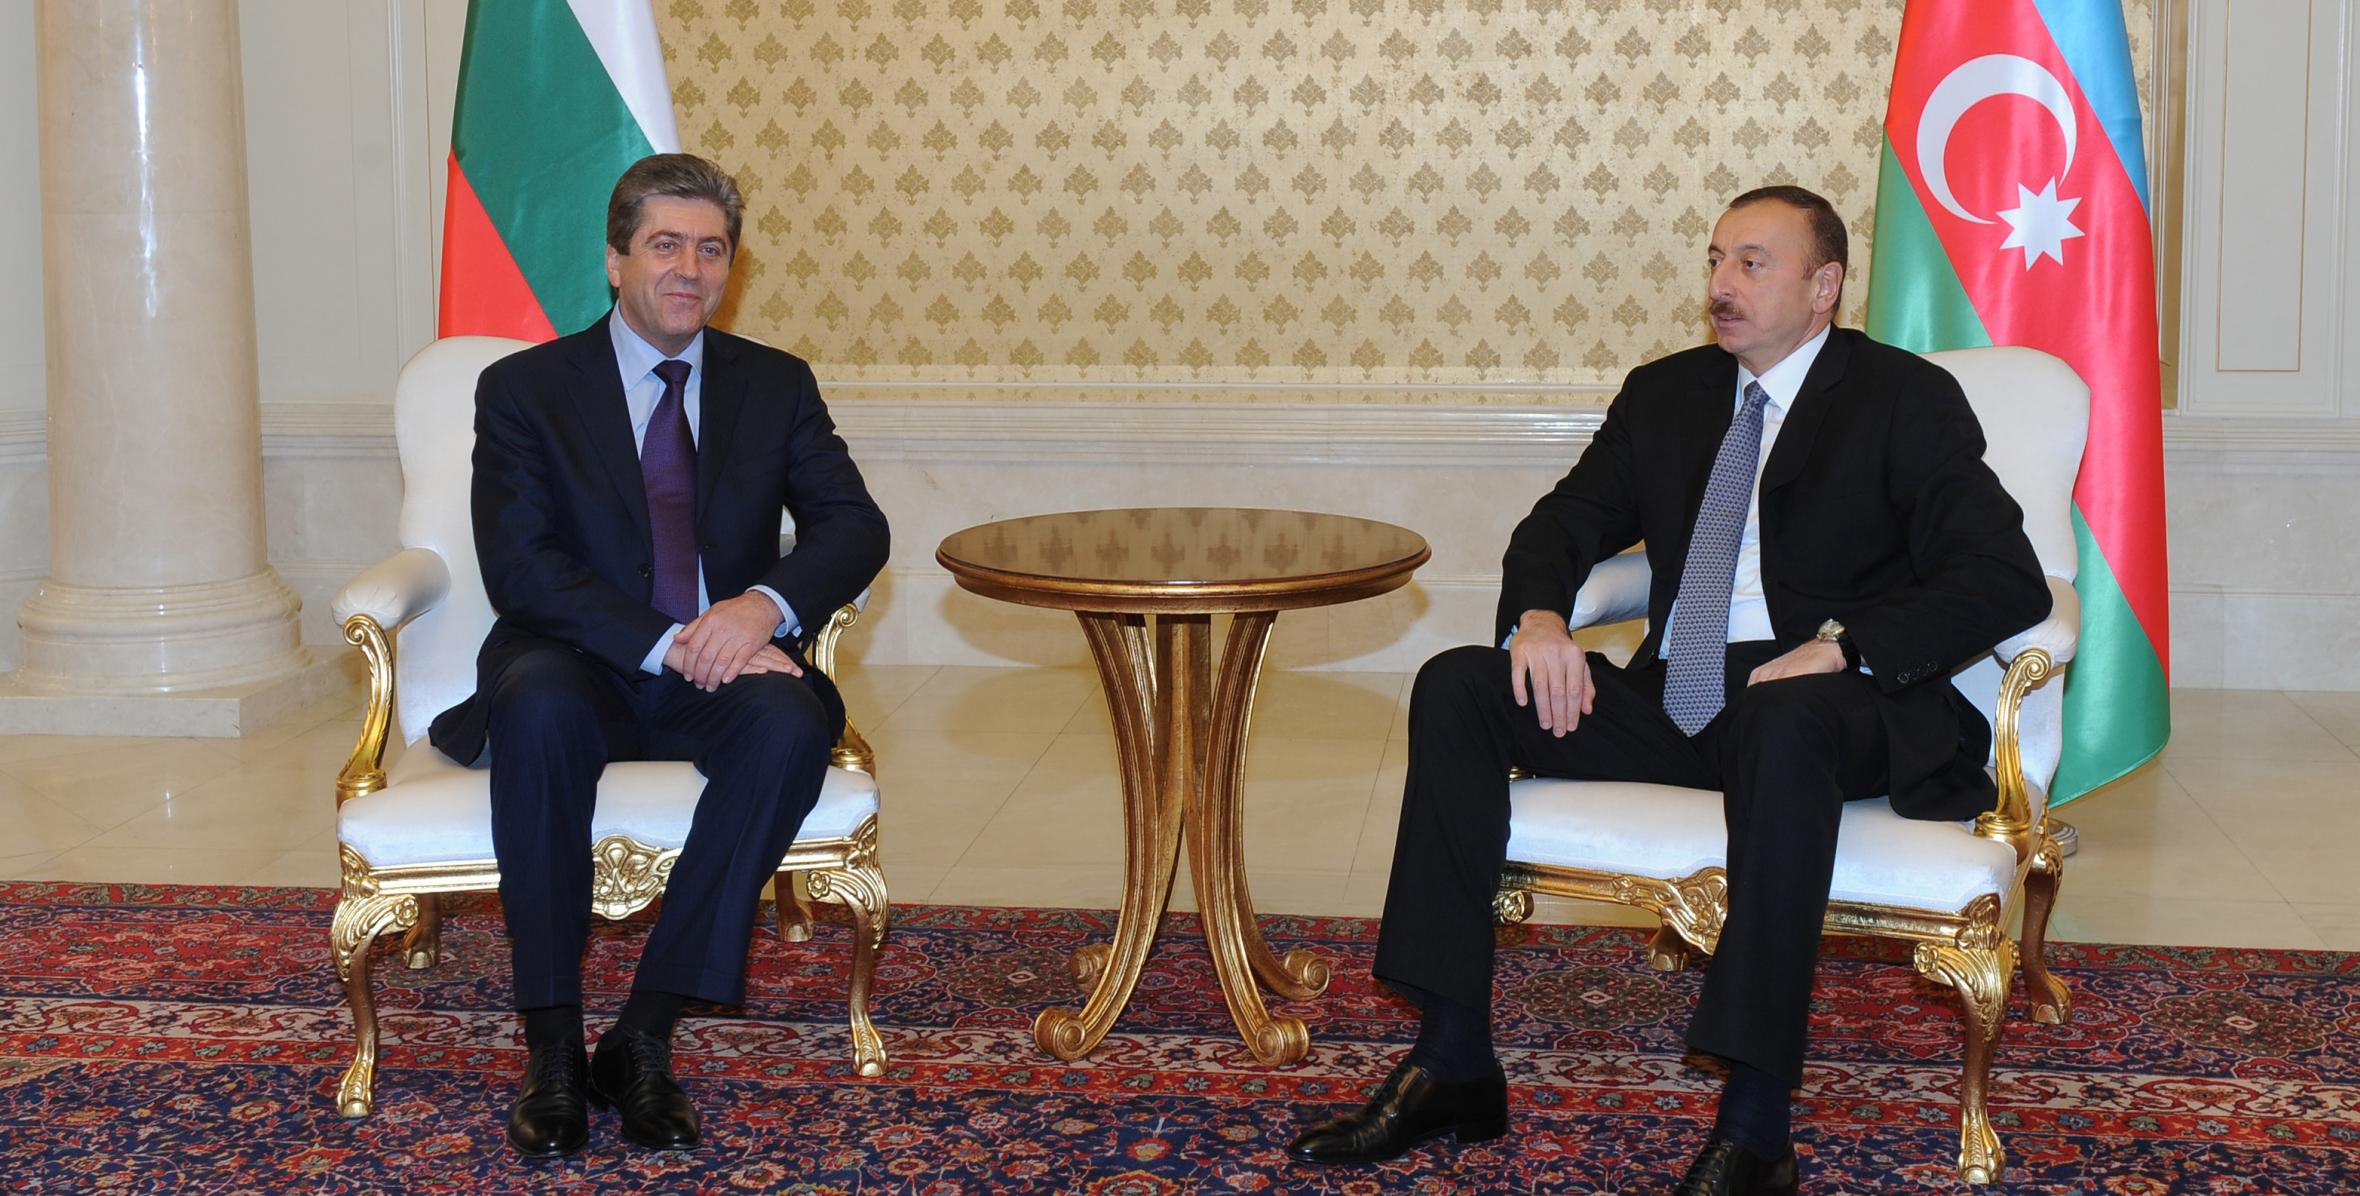 Presidents of Azerbaijan and Bulgaria had a face-to-face meeting